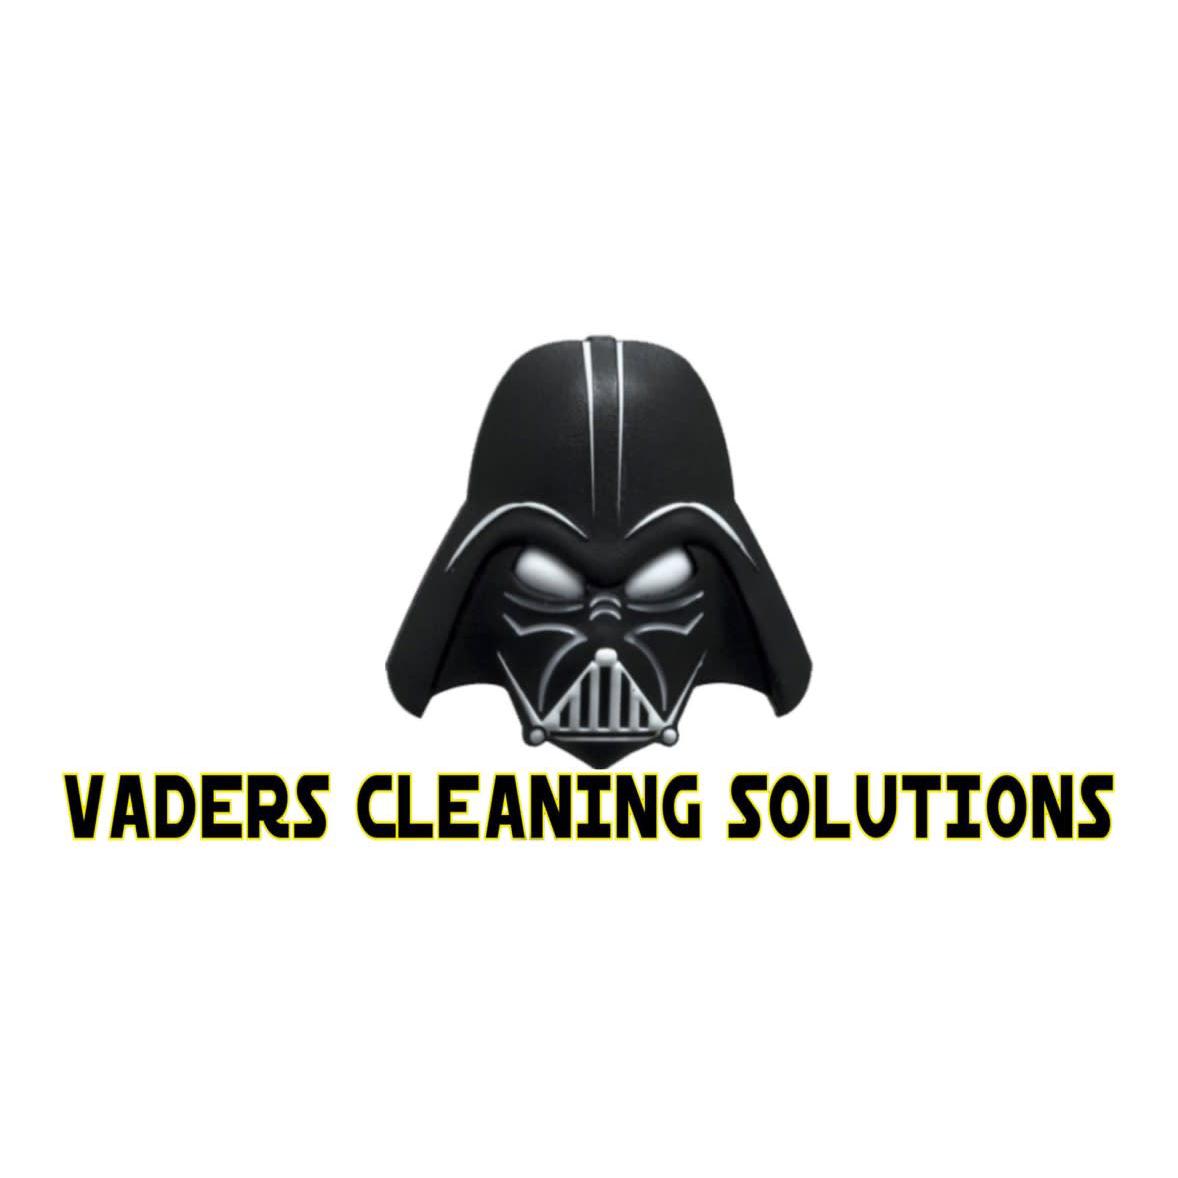 Vaders Cleaning Solutions logo